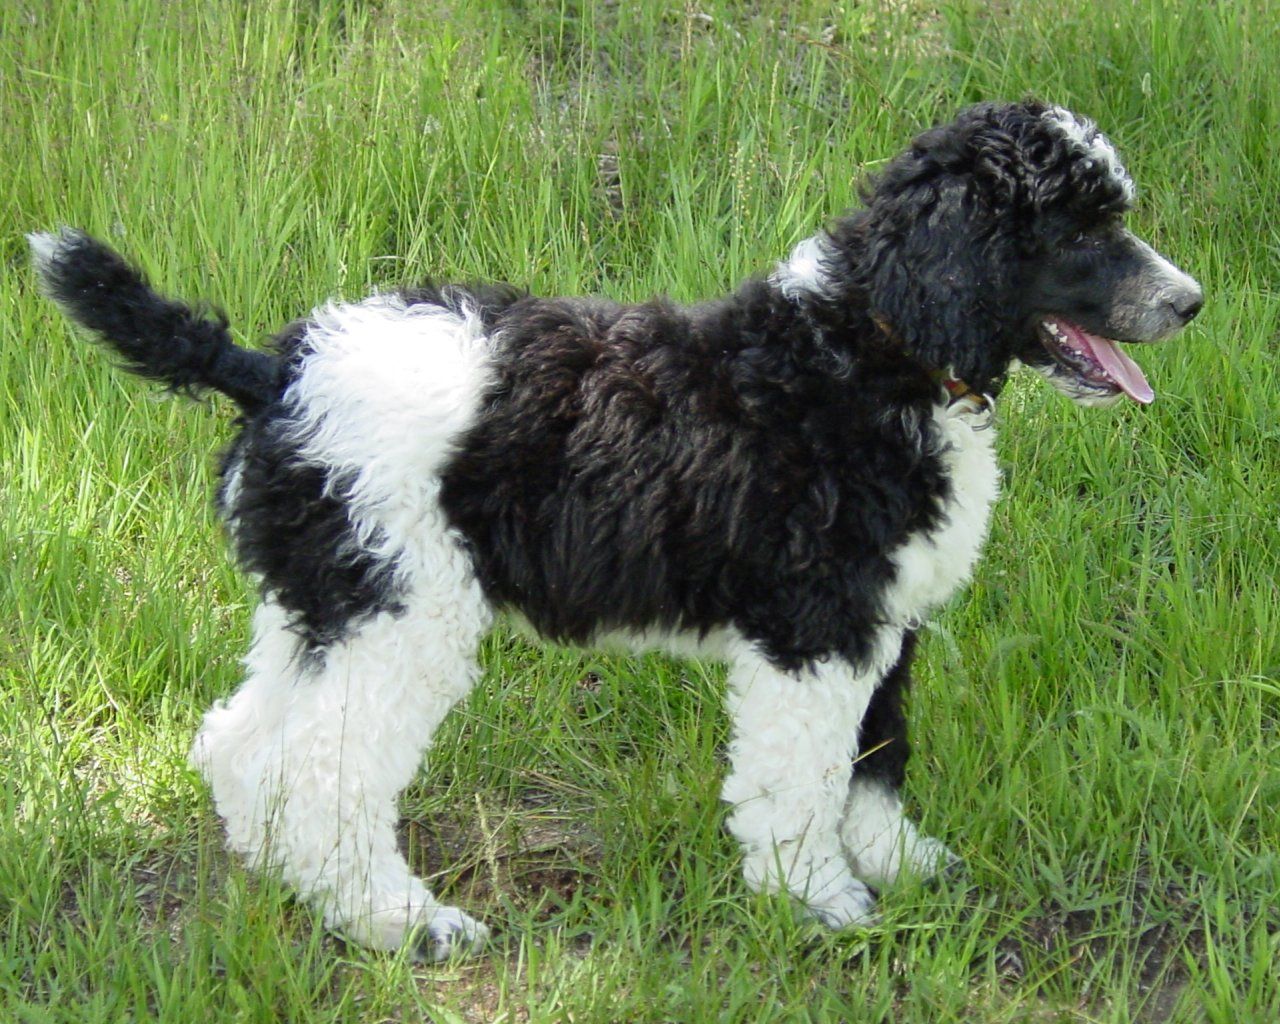 Standard Poodle Wallpaper, Puppy Picture, Breed Info. Poodle puppy standard, Poodle puppy